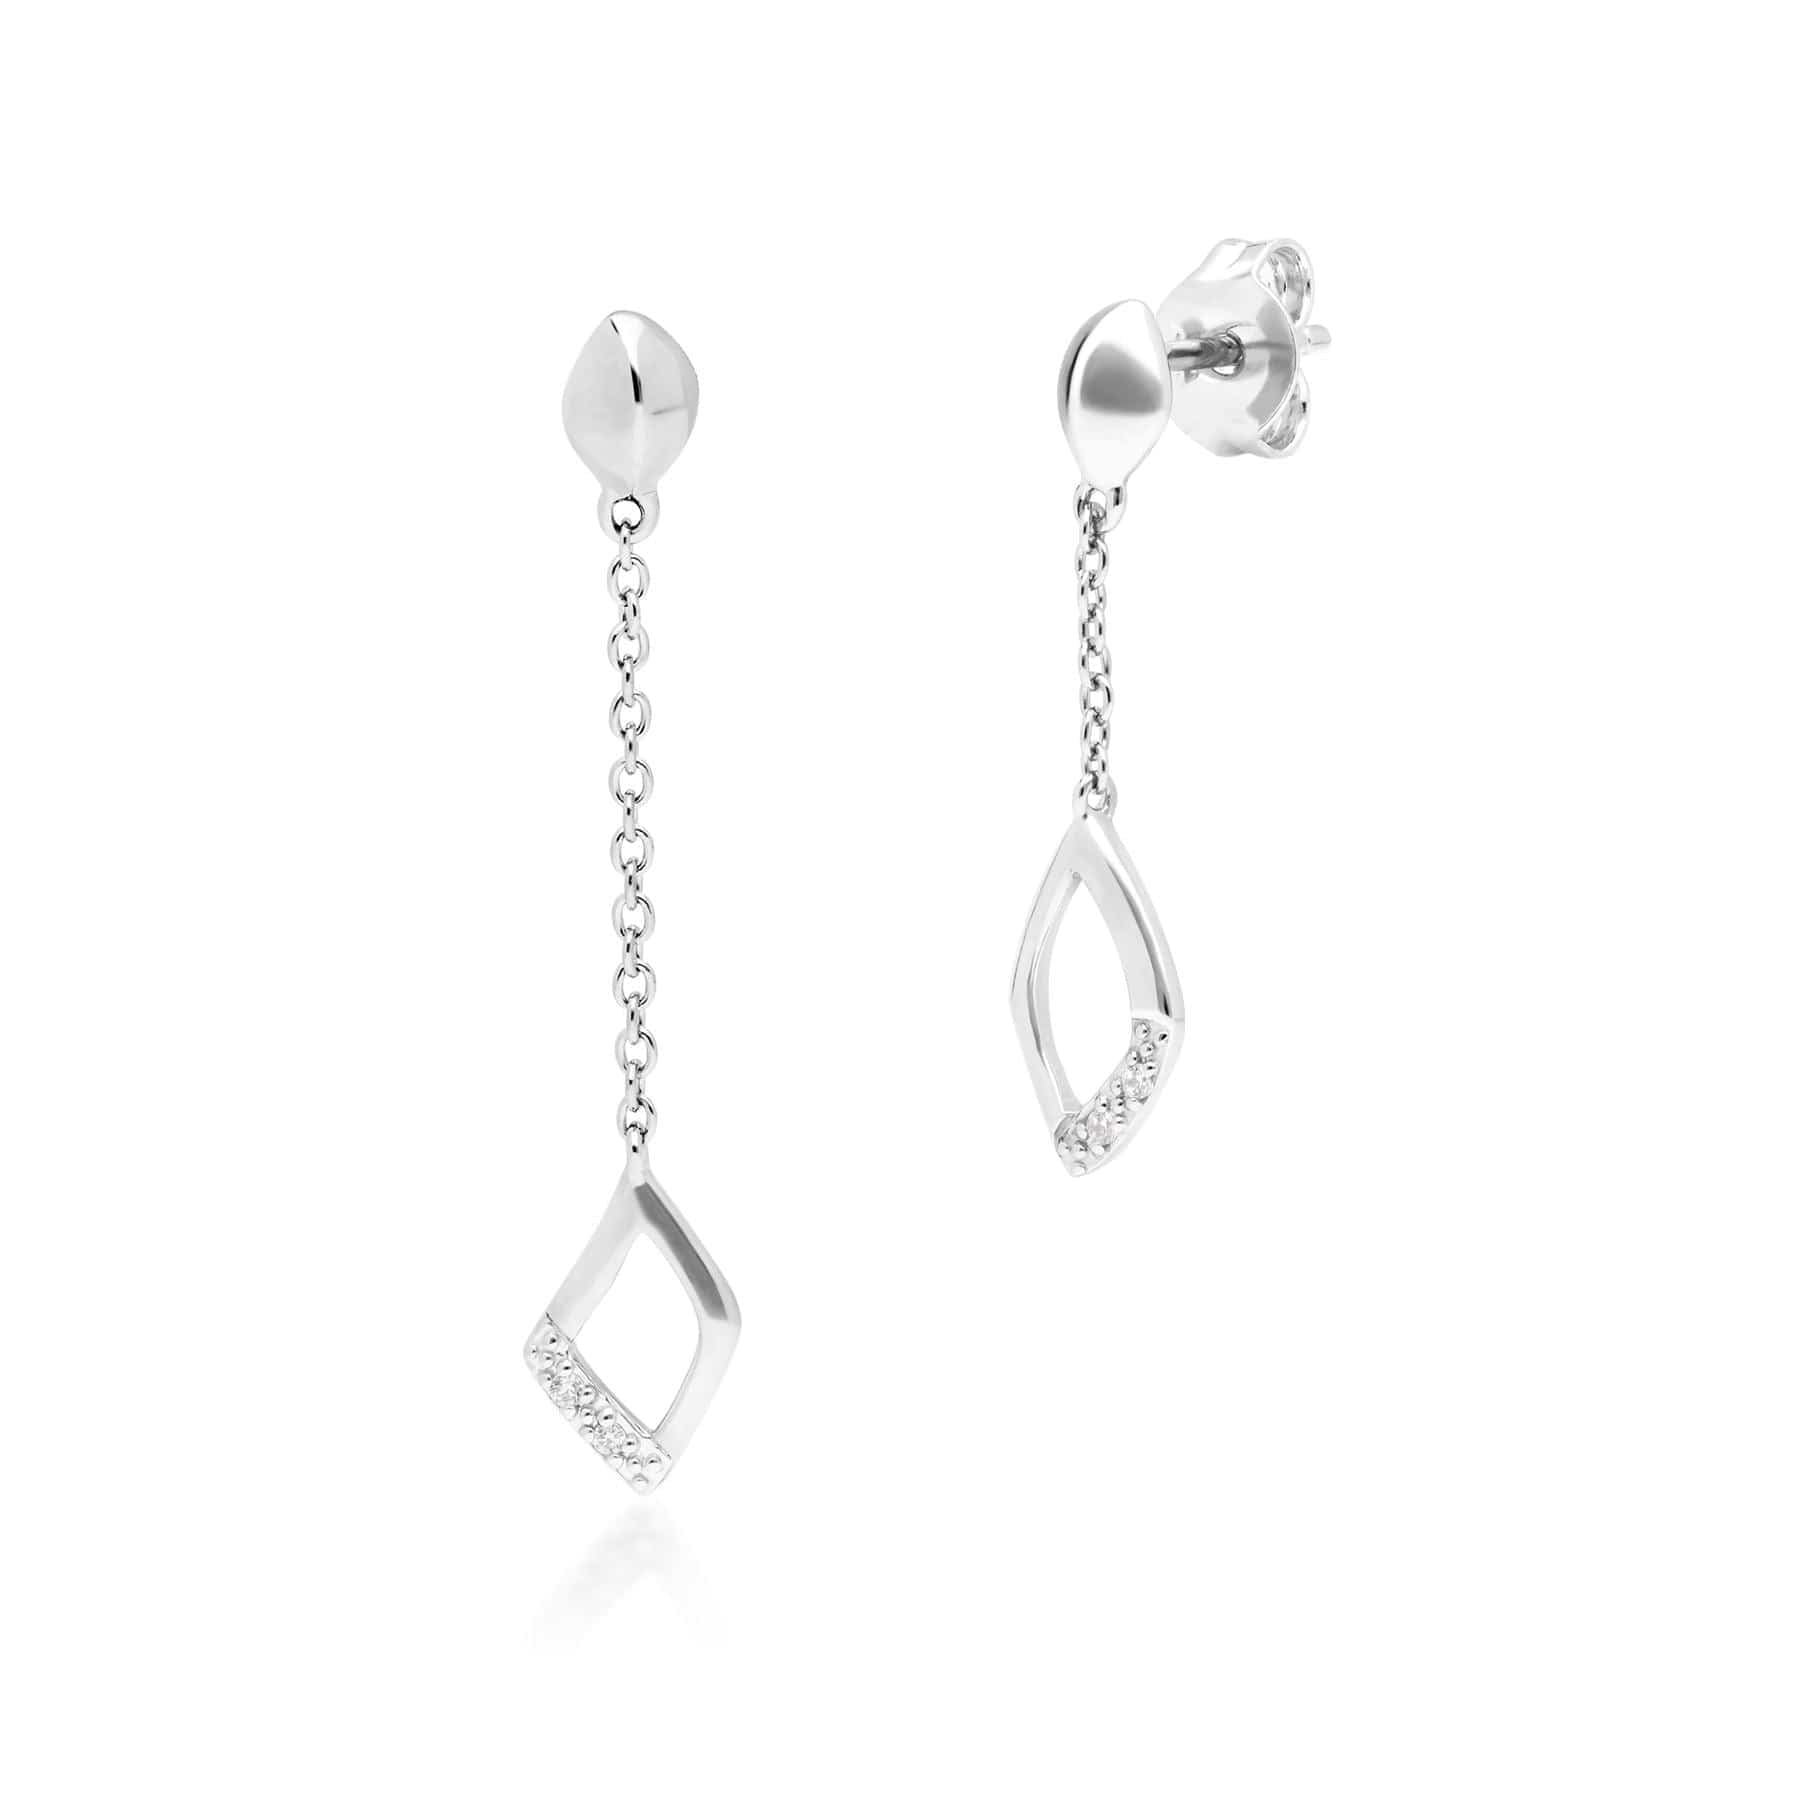 Photos - Earrings Diamond Pave Mismatched Dangle Drop  in 9ct White Gold